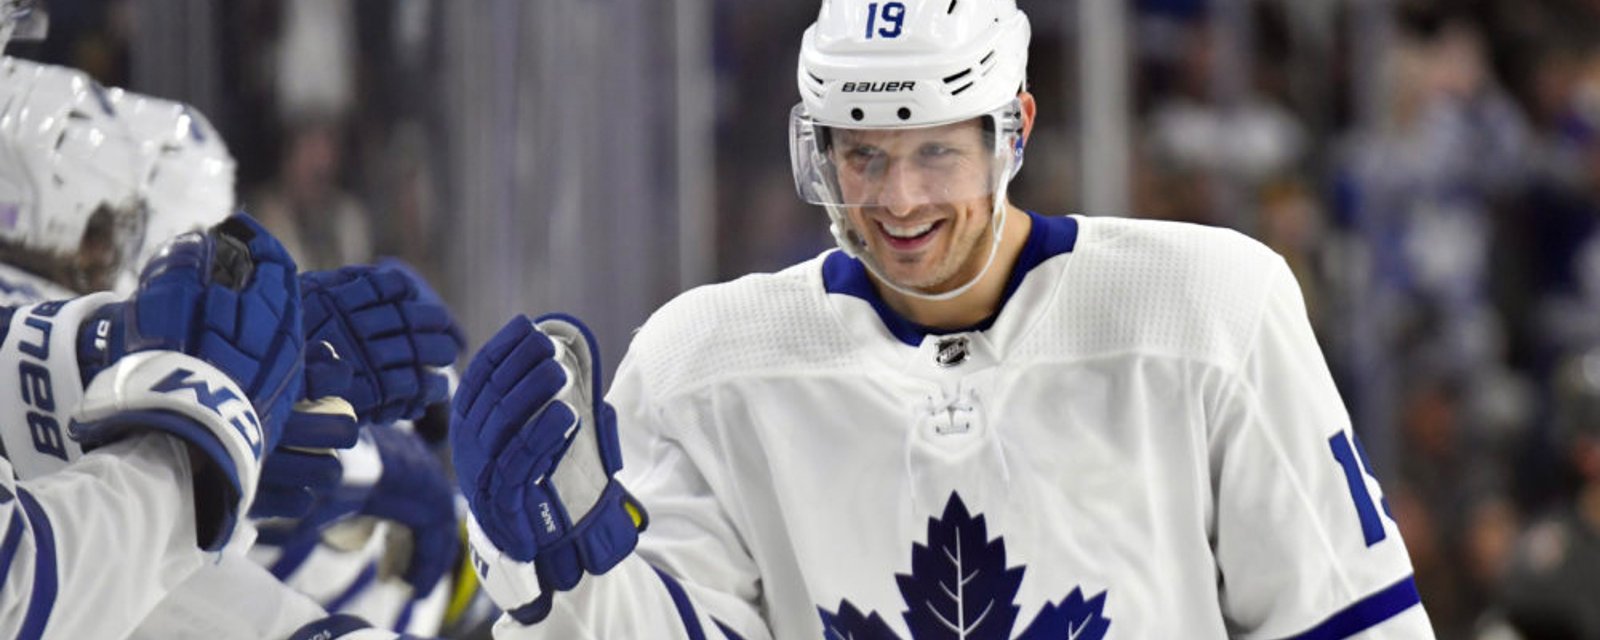 Spezza spearheads campaign to have Leafs teammates pay AHL players